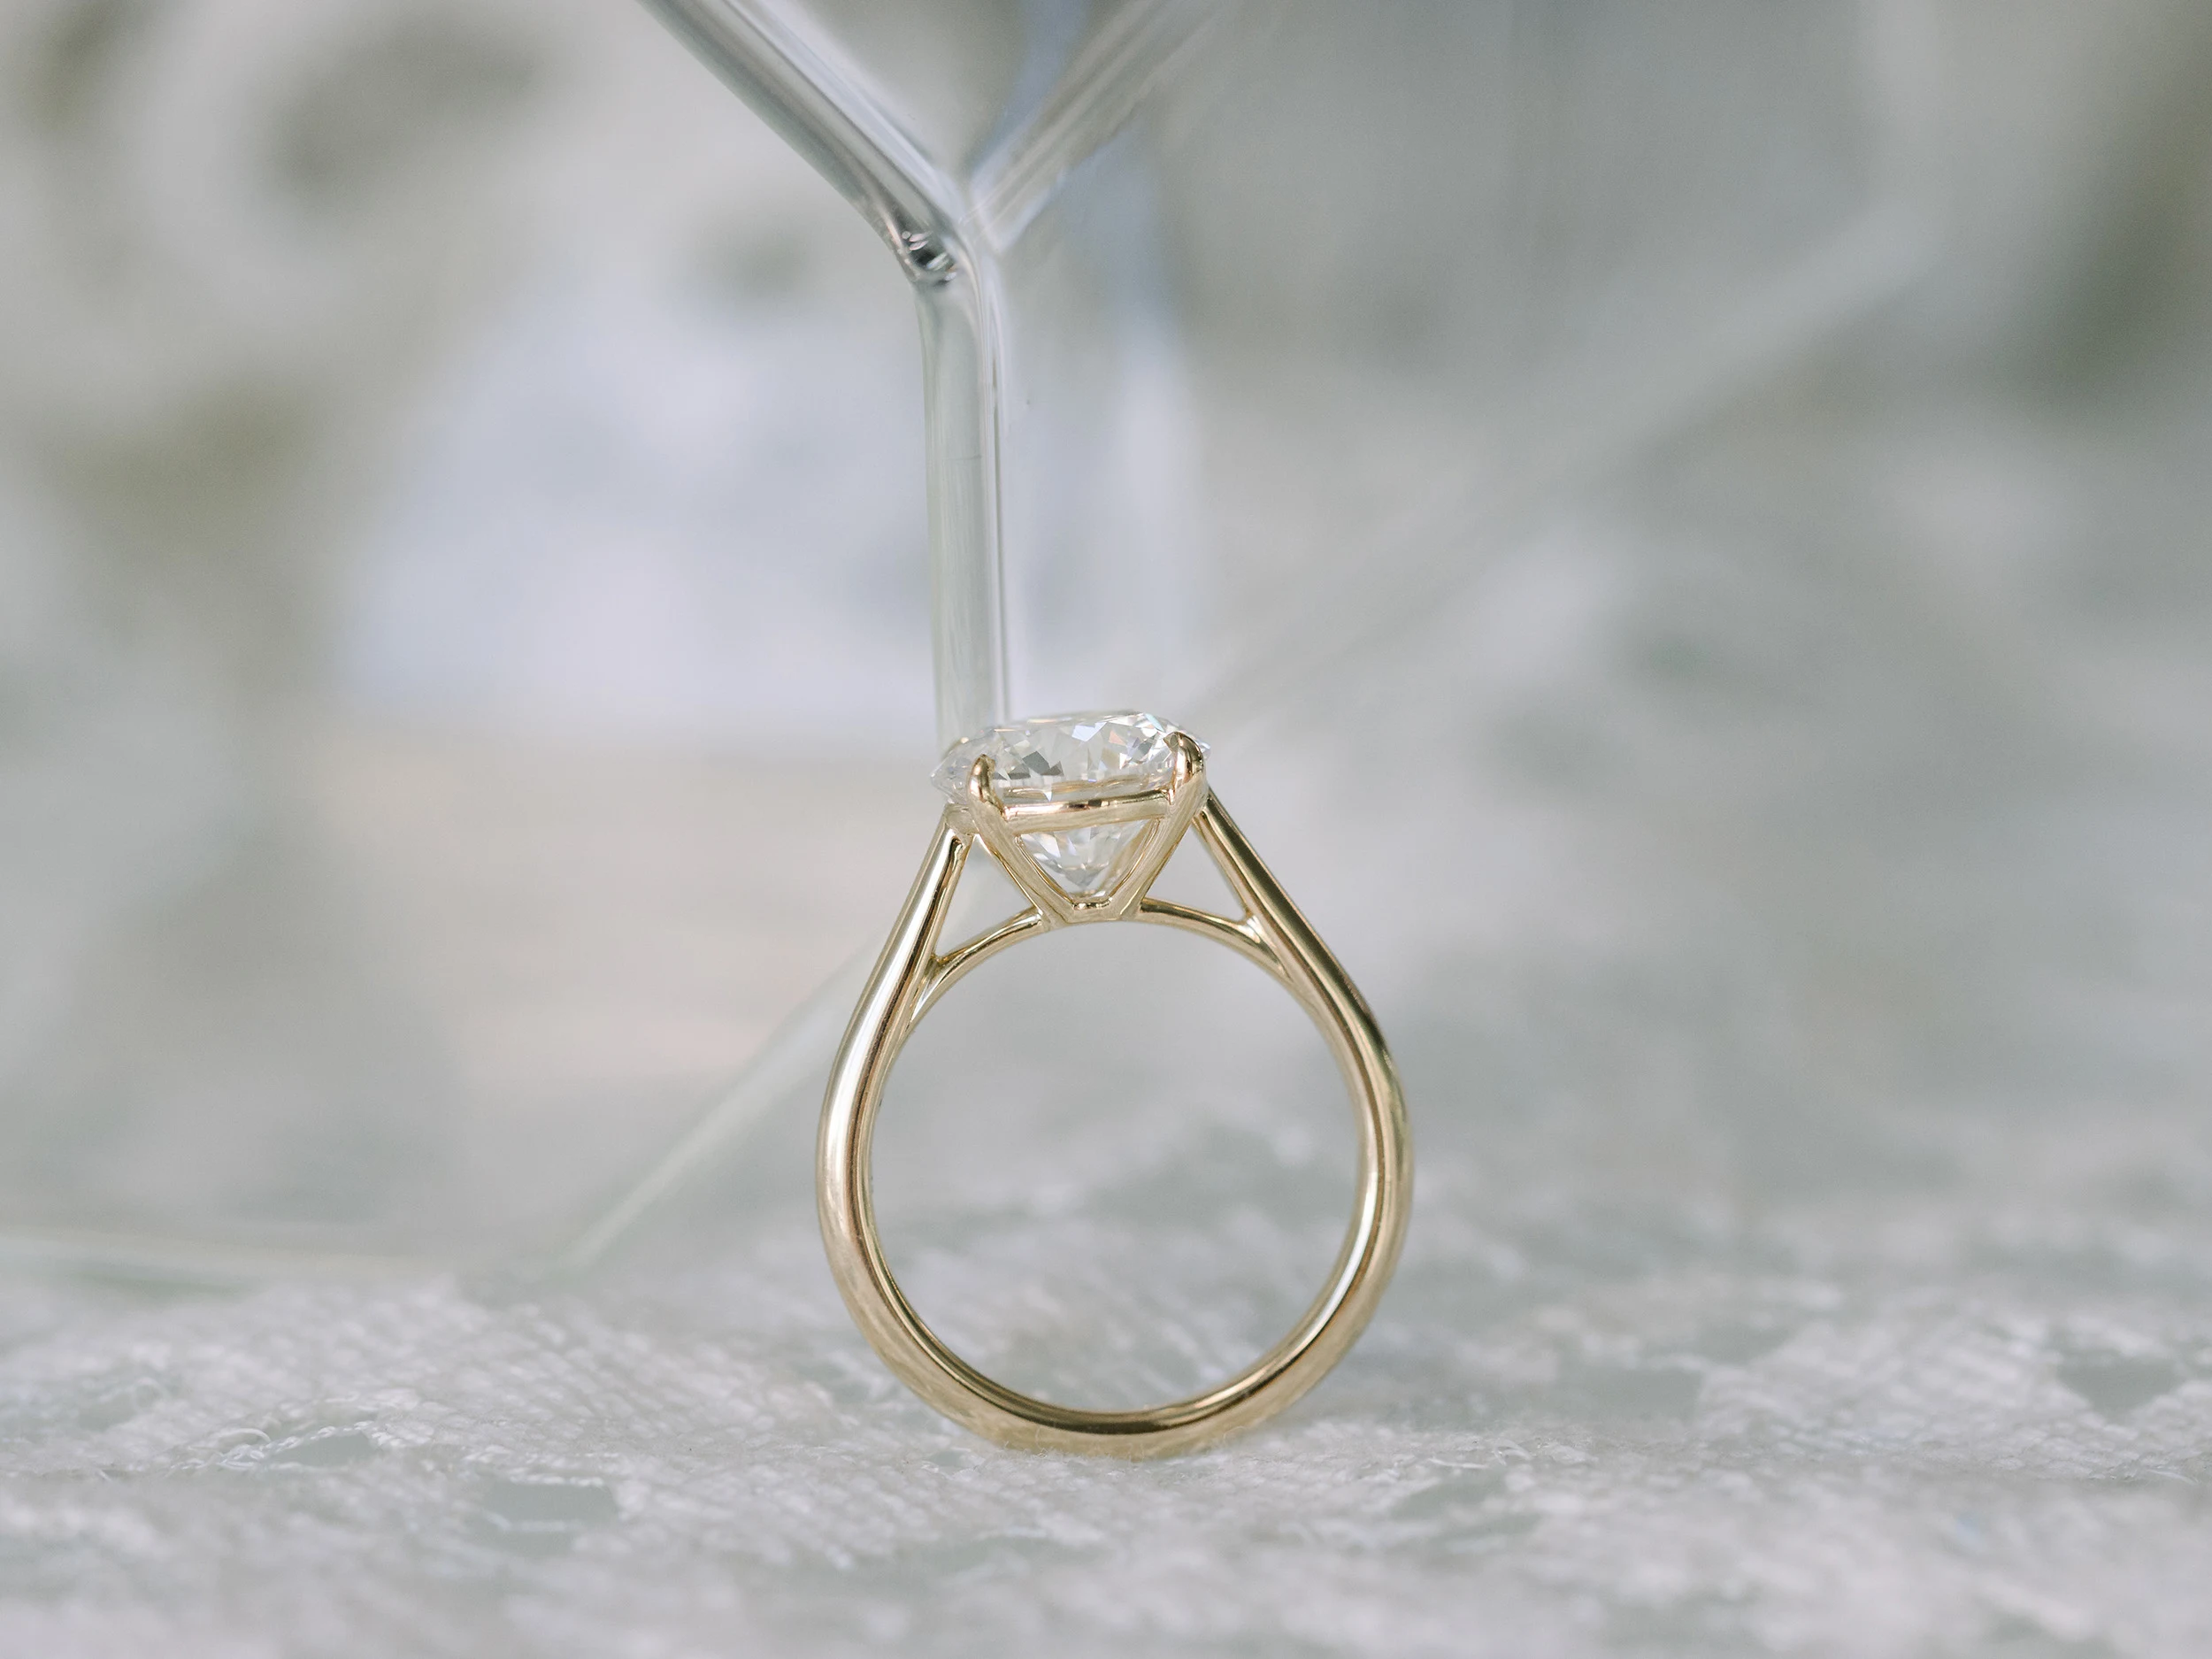 High Quality 2.0 Carat Lab Diamonds set in Yellow Gold Round Cathedral Solitaire (Profile View)